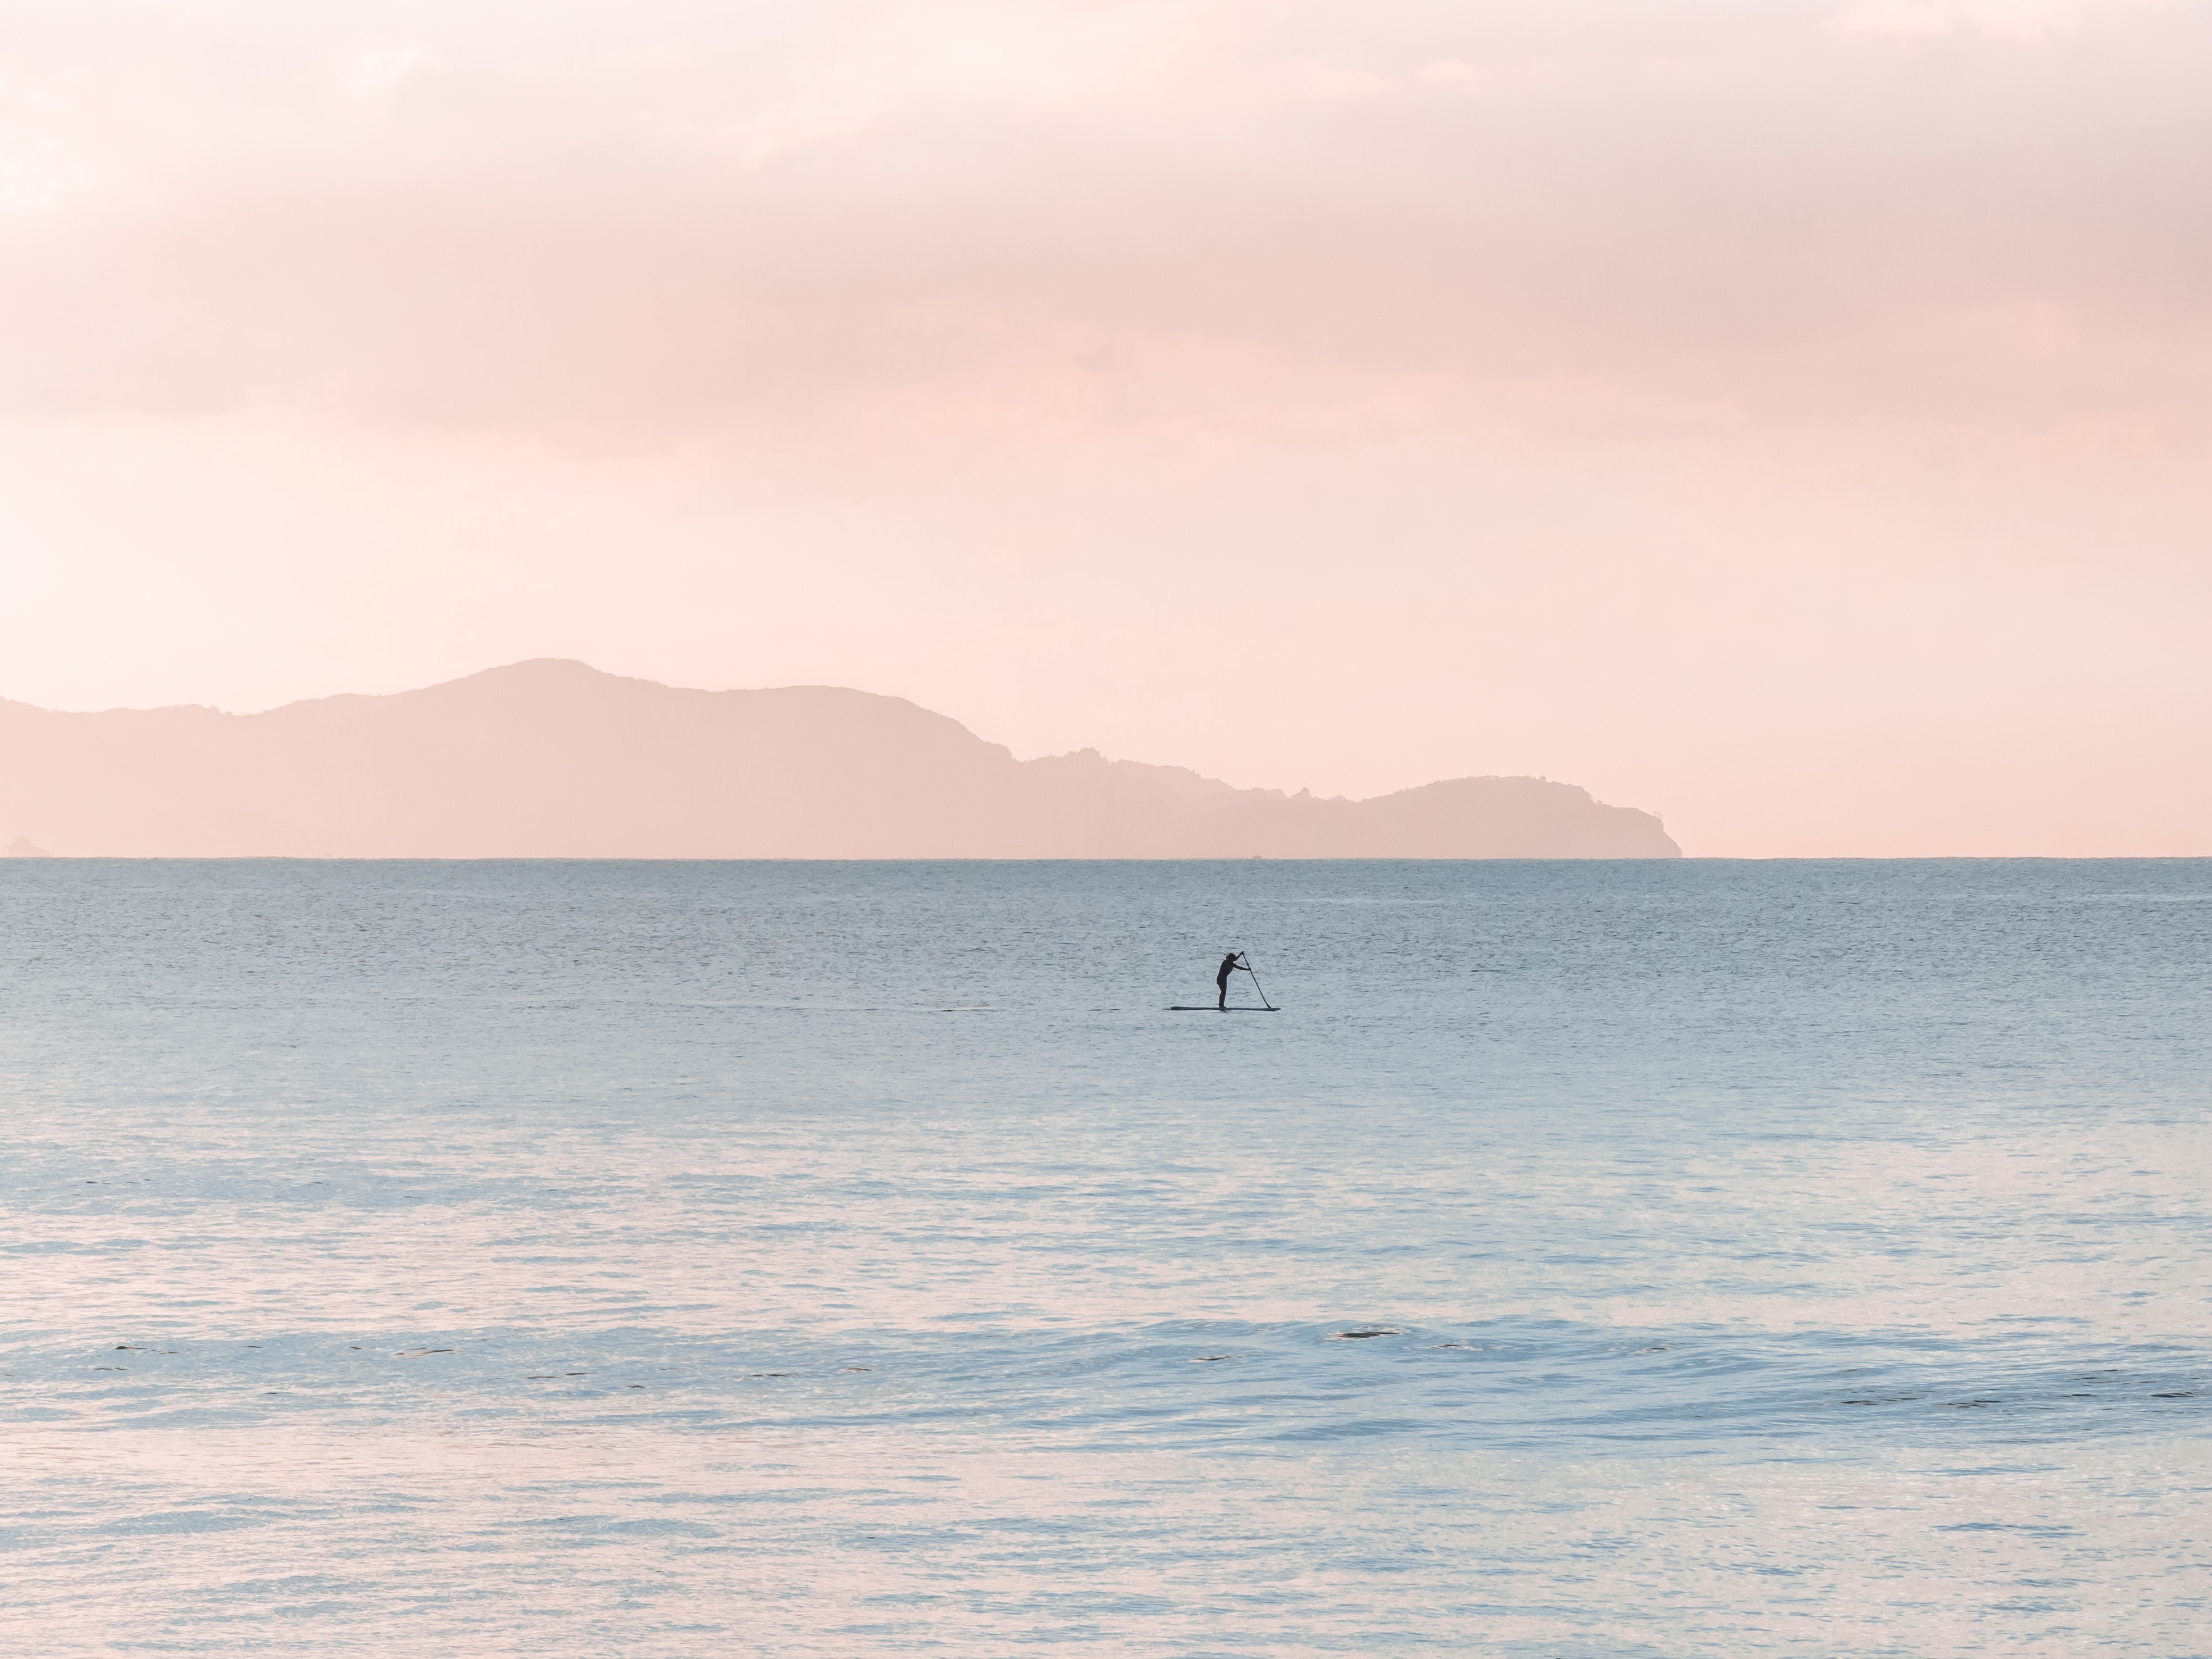 Free photo: Man Rowing a Boat on Sea at Daytime - Clouds, Sea, Water ...